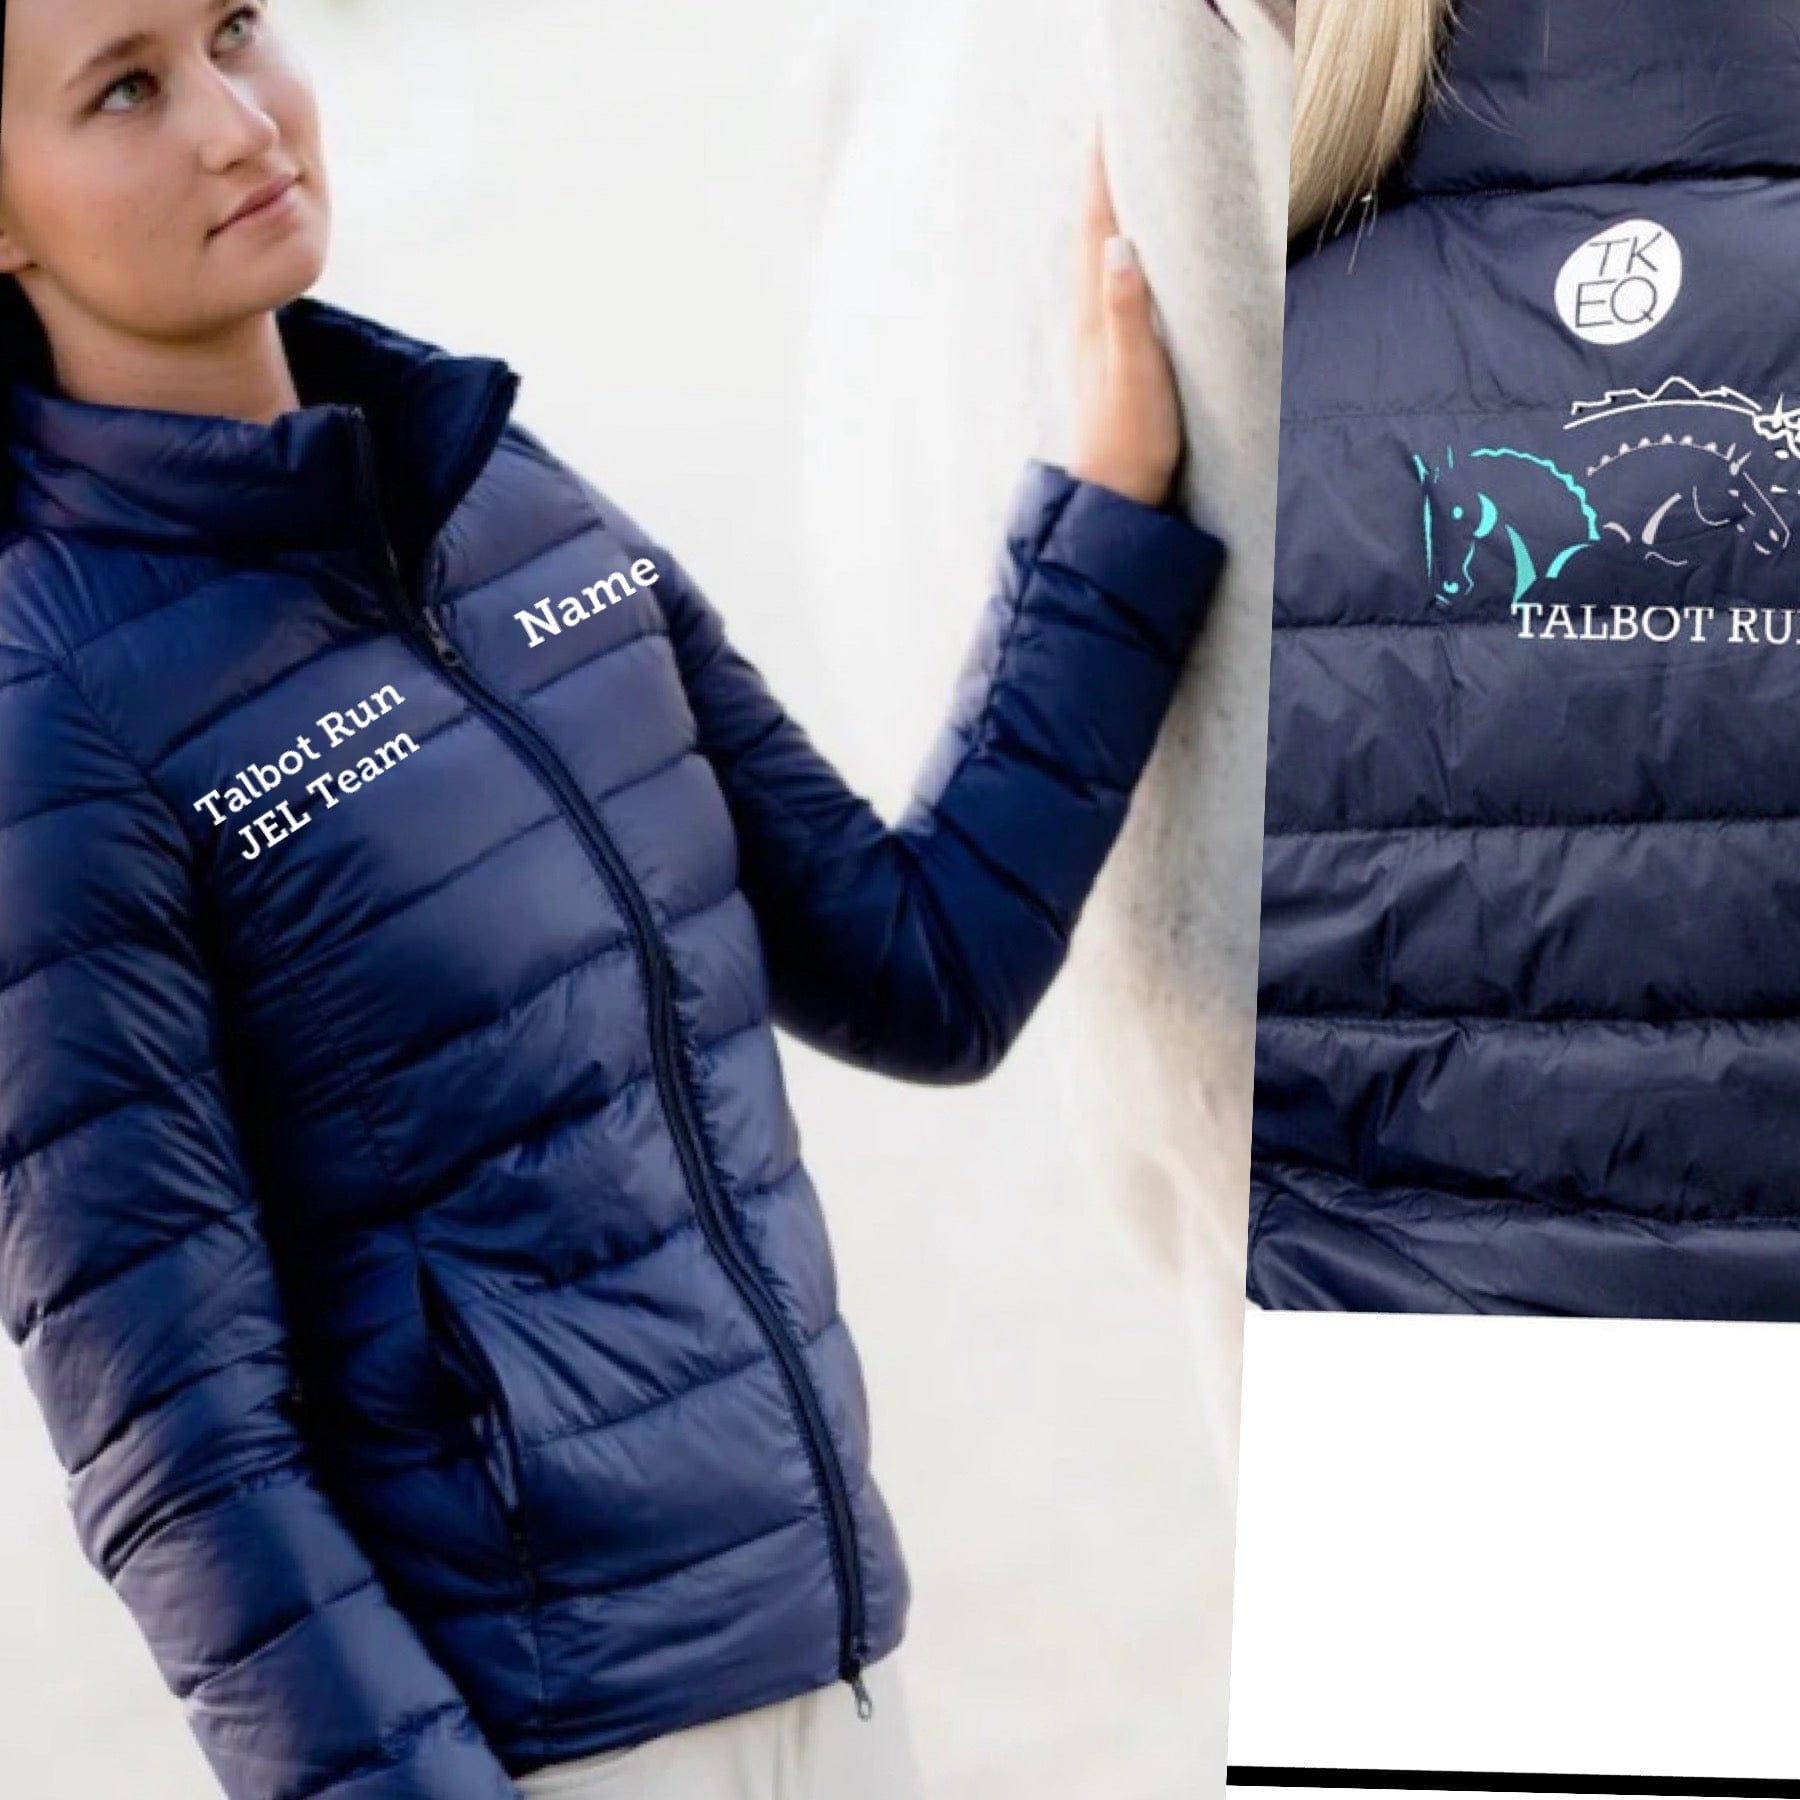 Equestrian Team Apparel Talbot Run- JEL Team Puffy Jacket equestrian team apparel online tack store mobile tack store custom farm apparel custom show stable clothing equestrian lifestyle horse show clothing riding clothes horses equestrian tack store